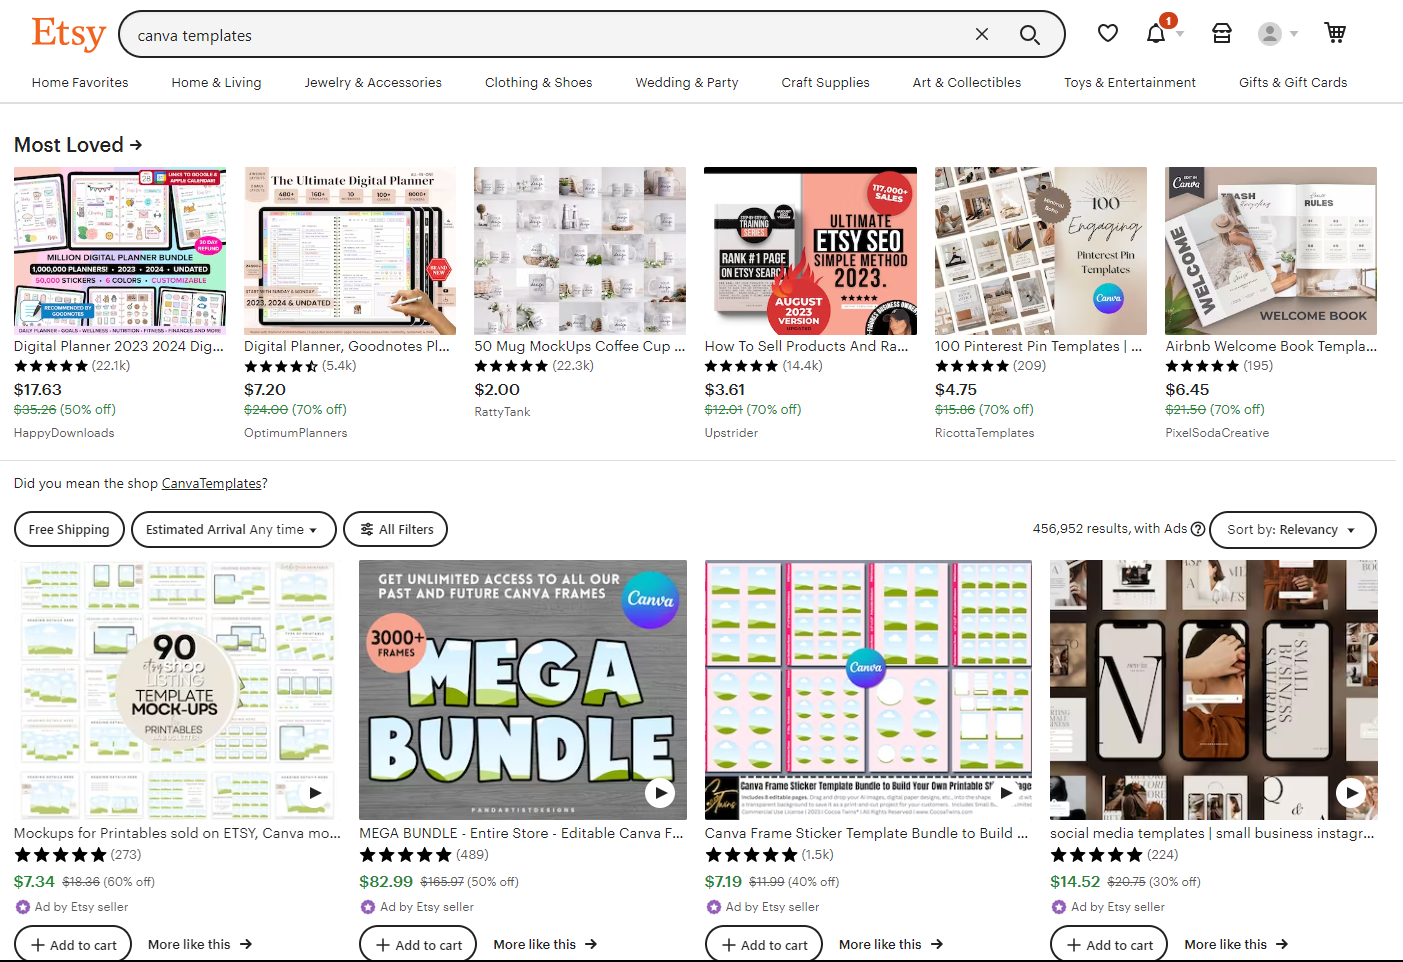 how to sell canva templates on etsy - screenshot of canva template search results on etsy website